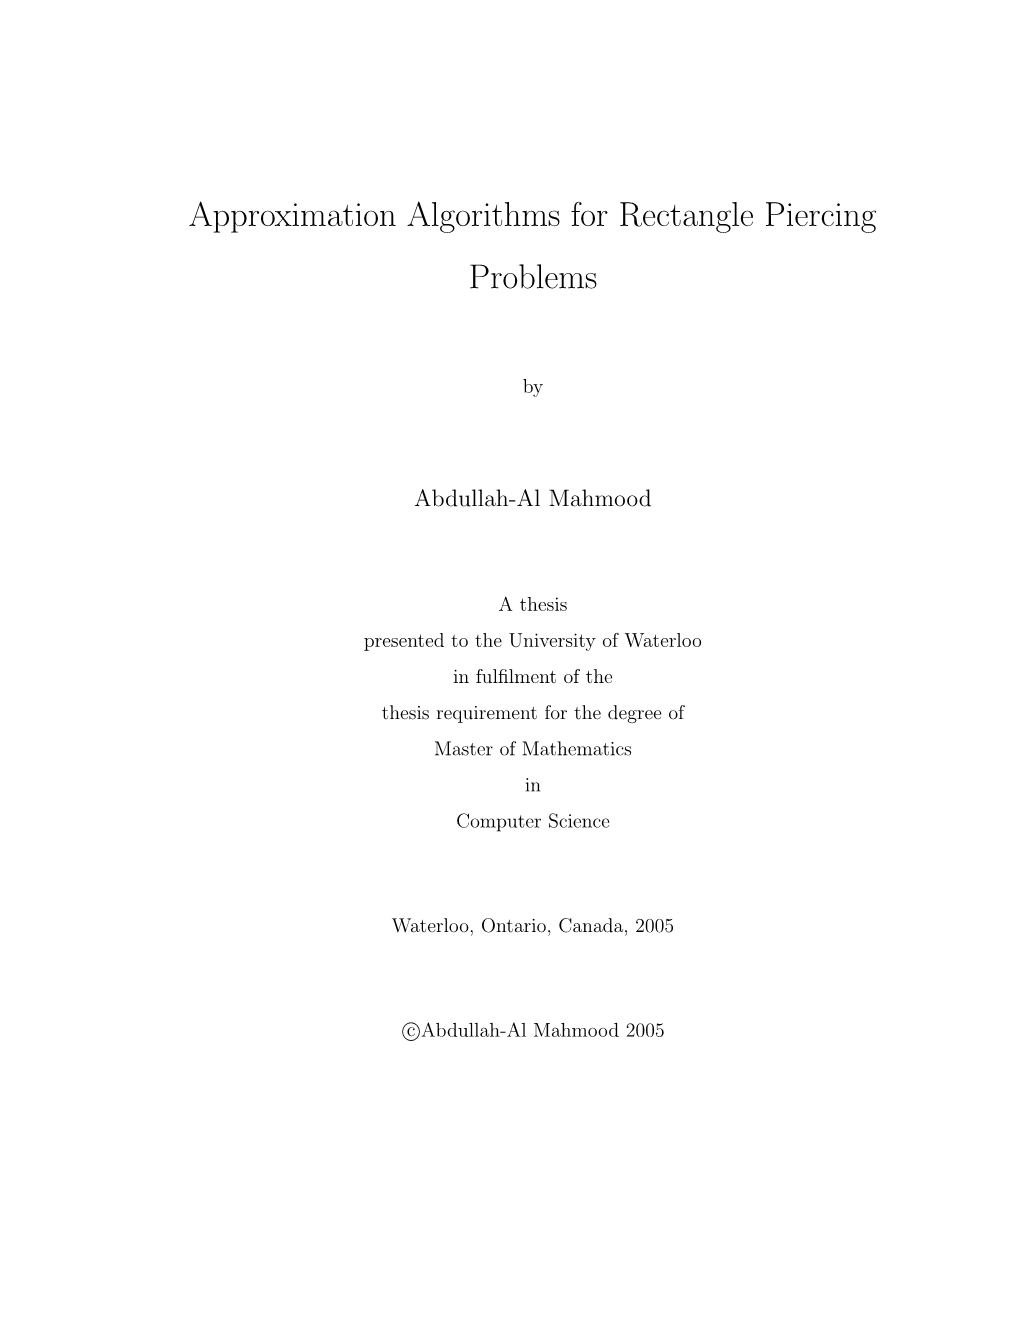 Approximation Algorithms for Rectangle Piercing Problems